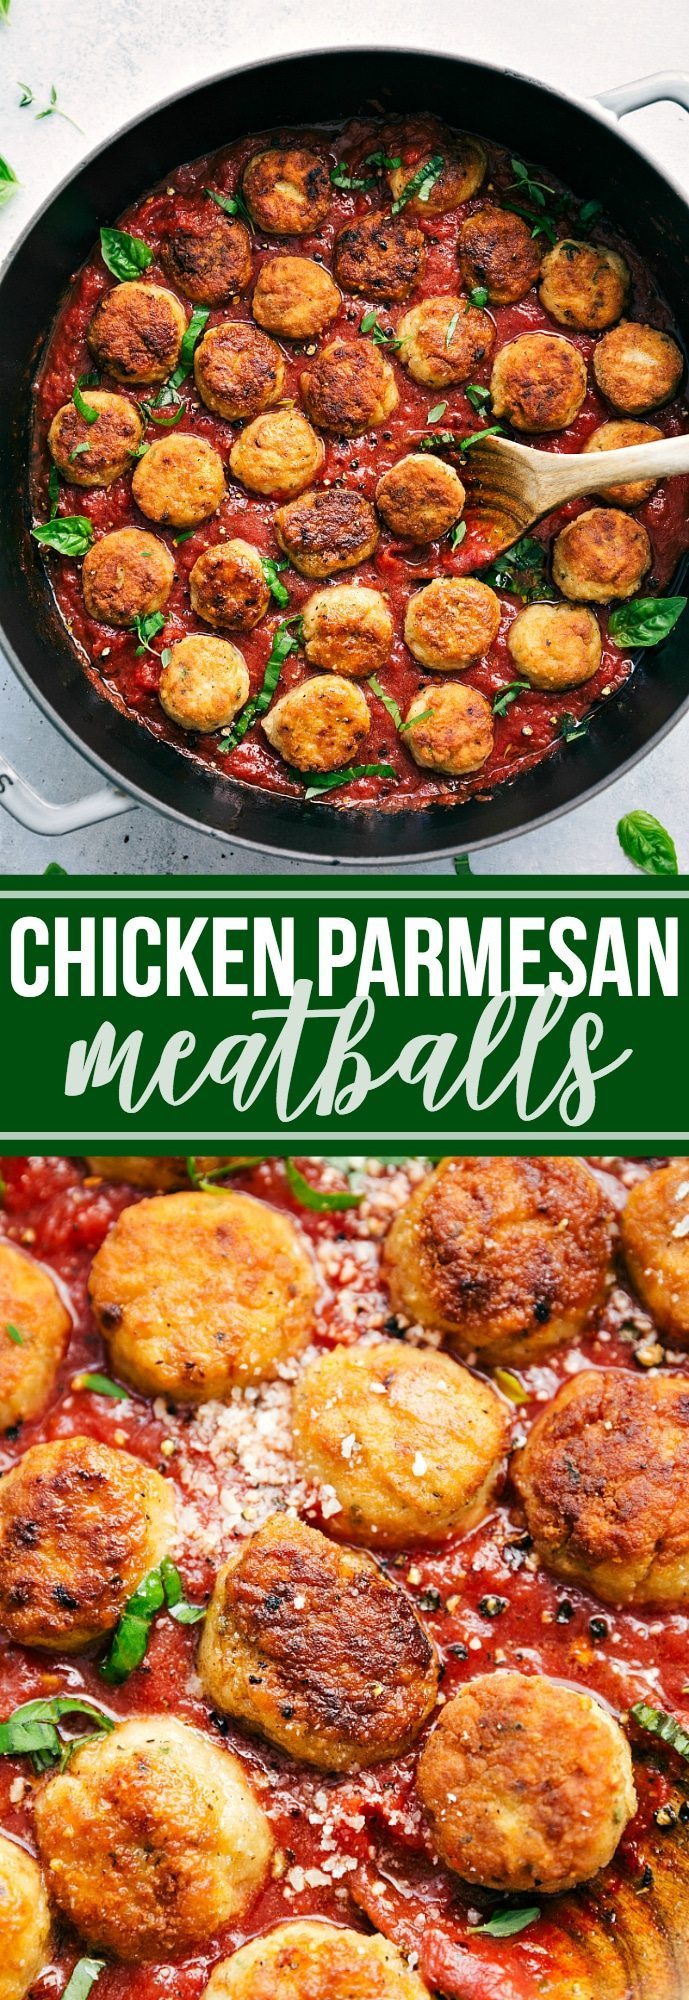 A fun twist on two classic Italian dishes -- CHICKEN PARMESAN MEATBALLS. Delicious and sure to be a hit! via chelseasmessyapron.com